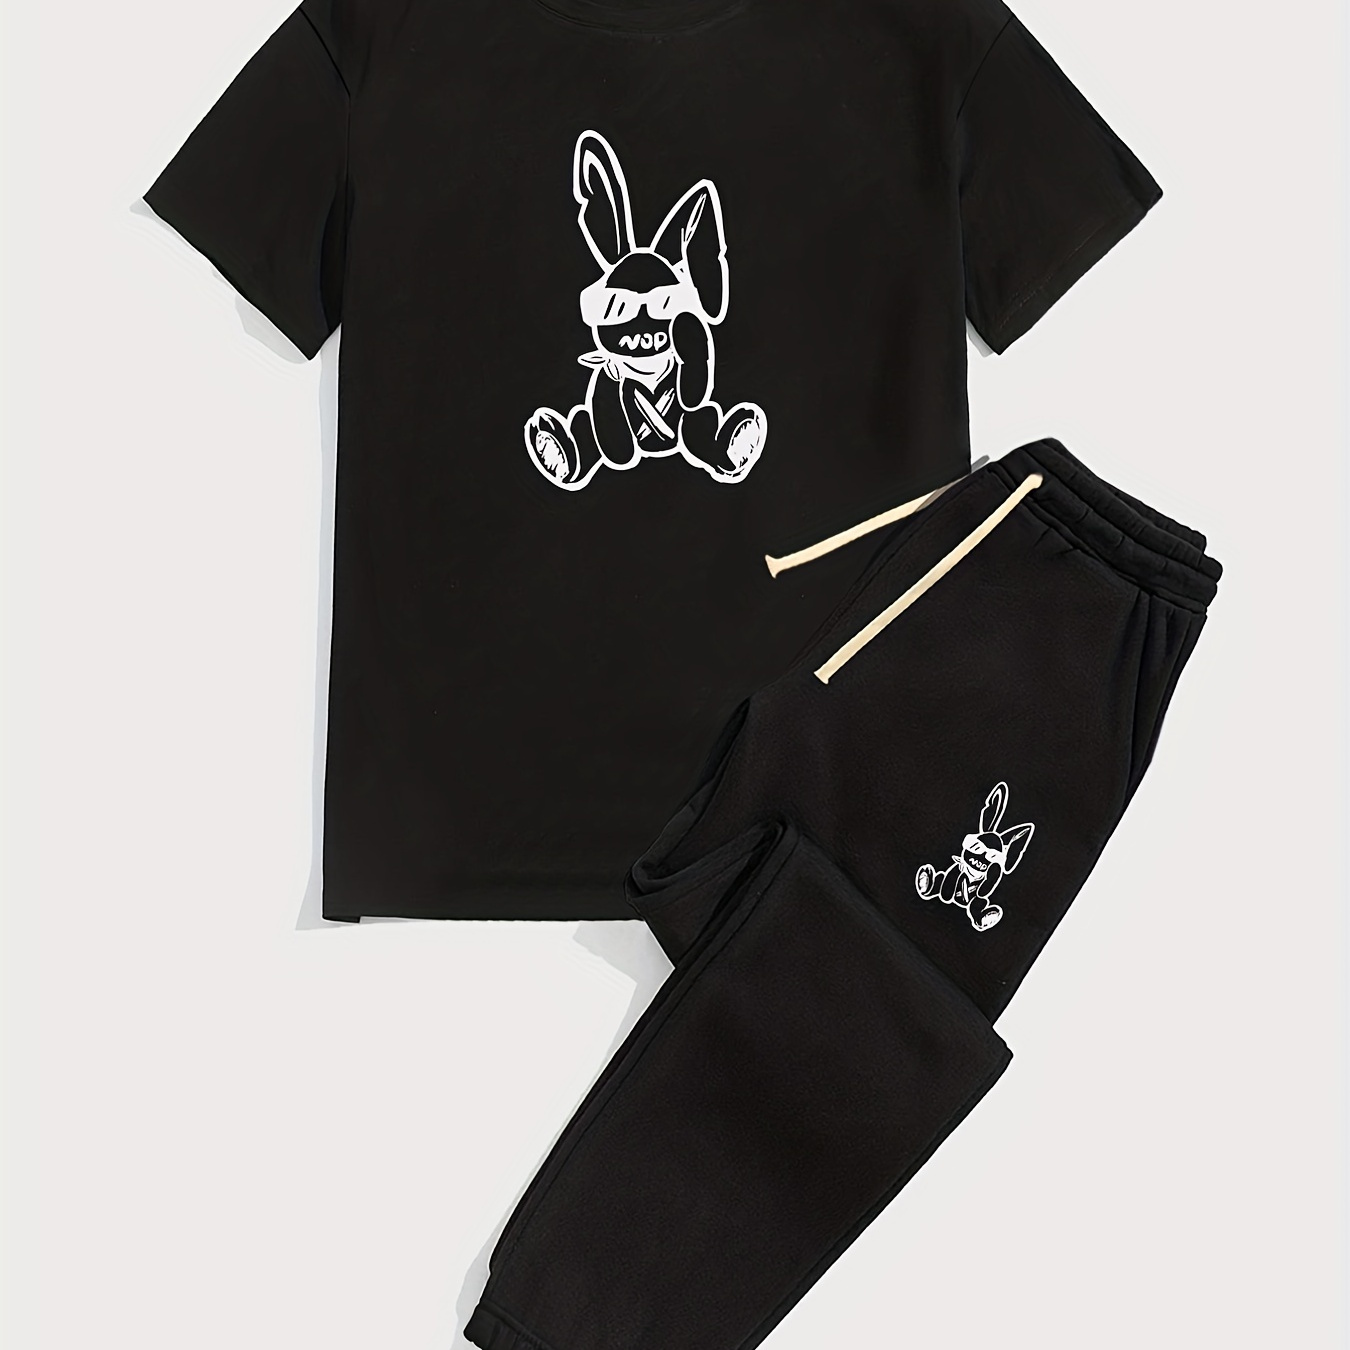 

Men's Casual Trendy Cool Rabbit T-shirt & Drawstrings Sweatpants Set For Summer Holiday Outdoor Sports, Creatively Designed